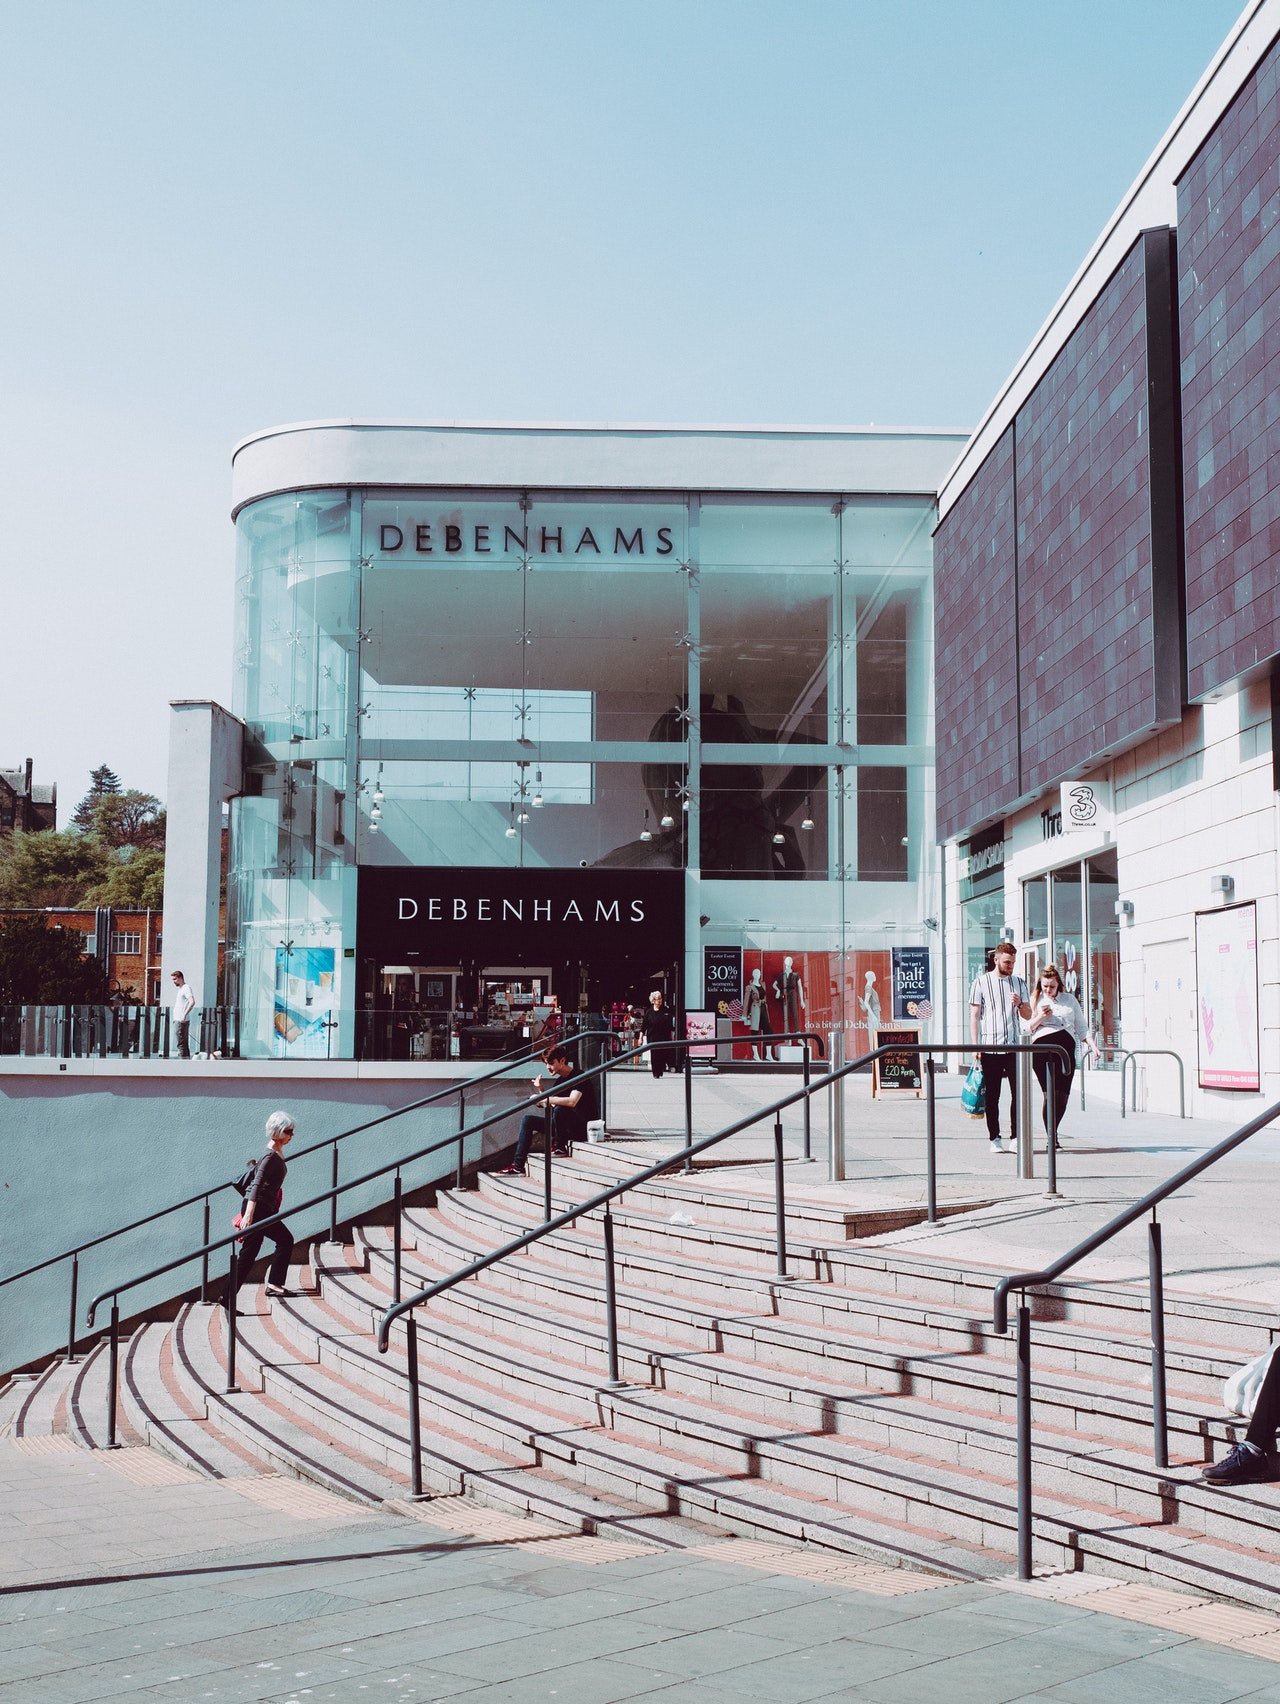 Photo of a shopping mall | Photo: Pexels